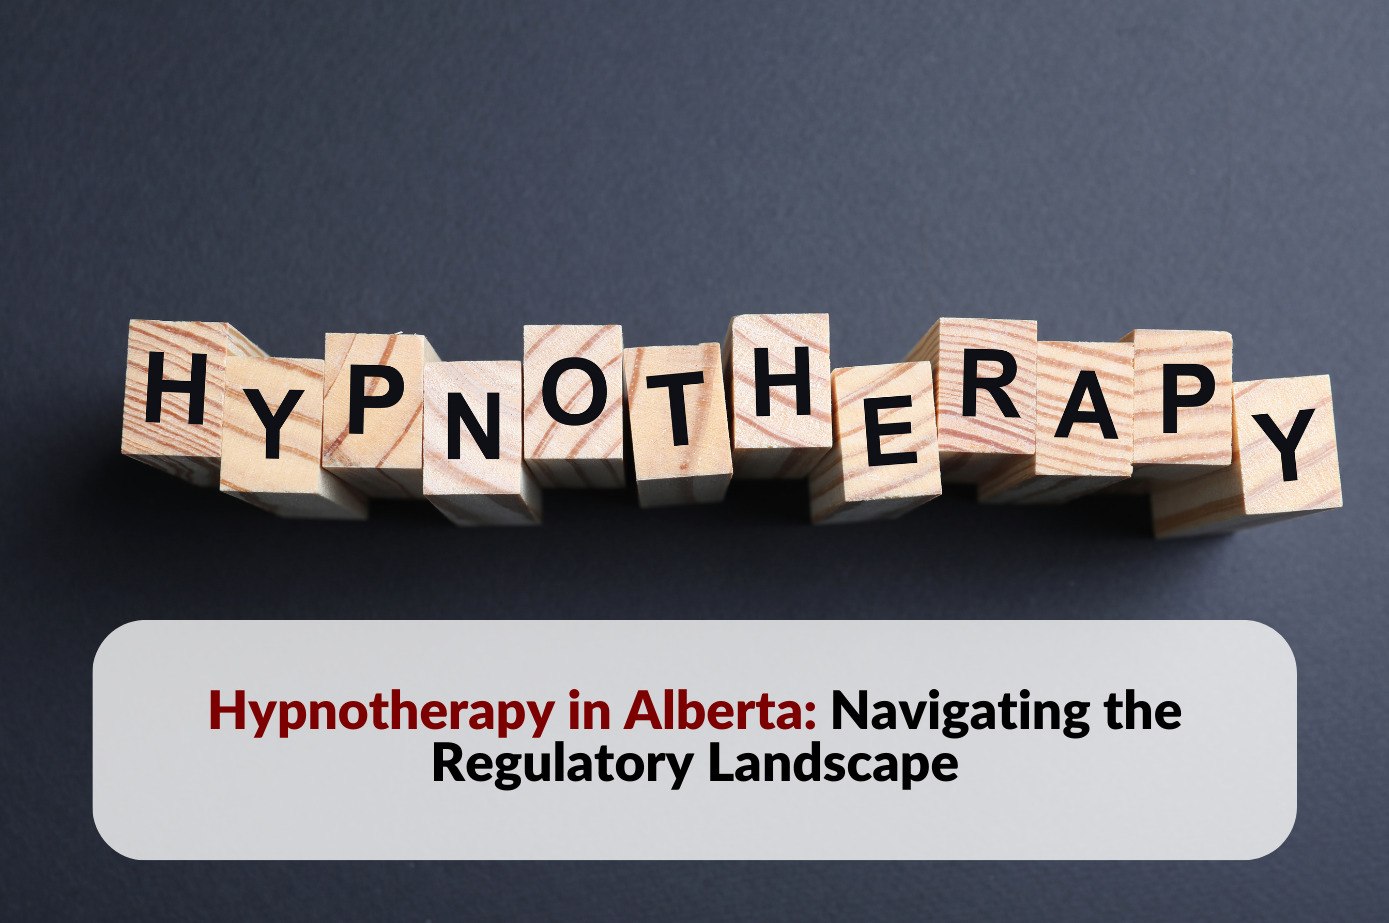 Image depicting the article on hypnotherapy in Alberta, with text superimposed on a blue textured background and wooden blocks spelling 'Hypnotherapy.